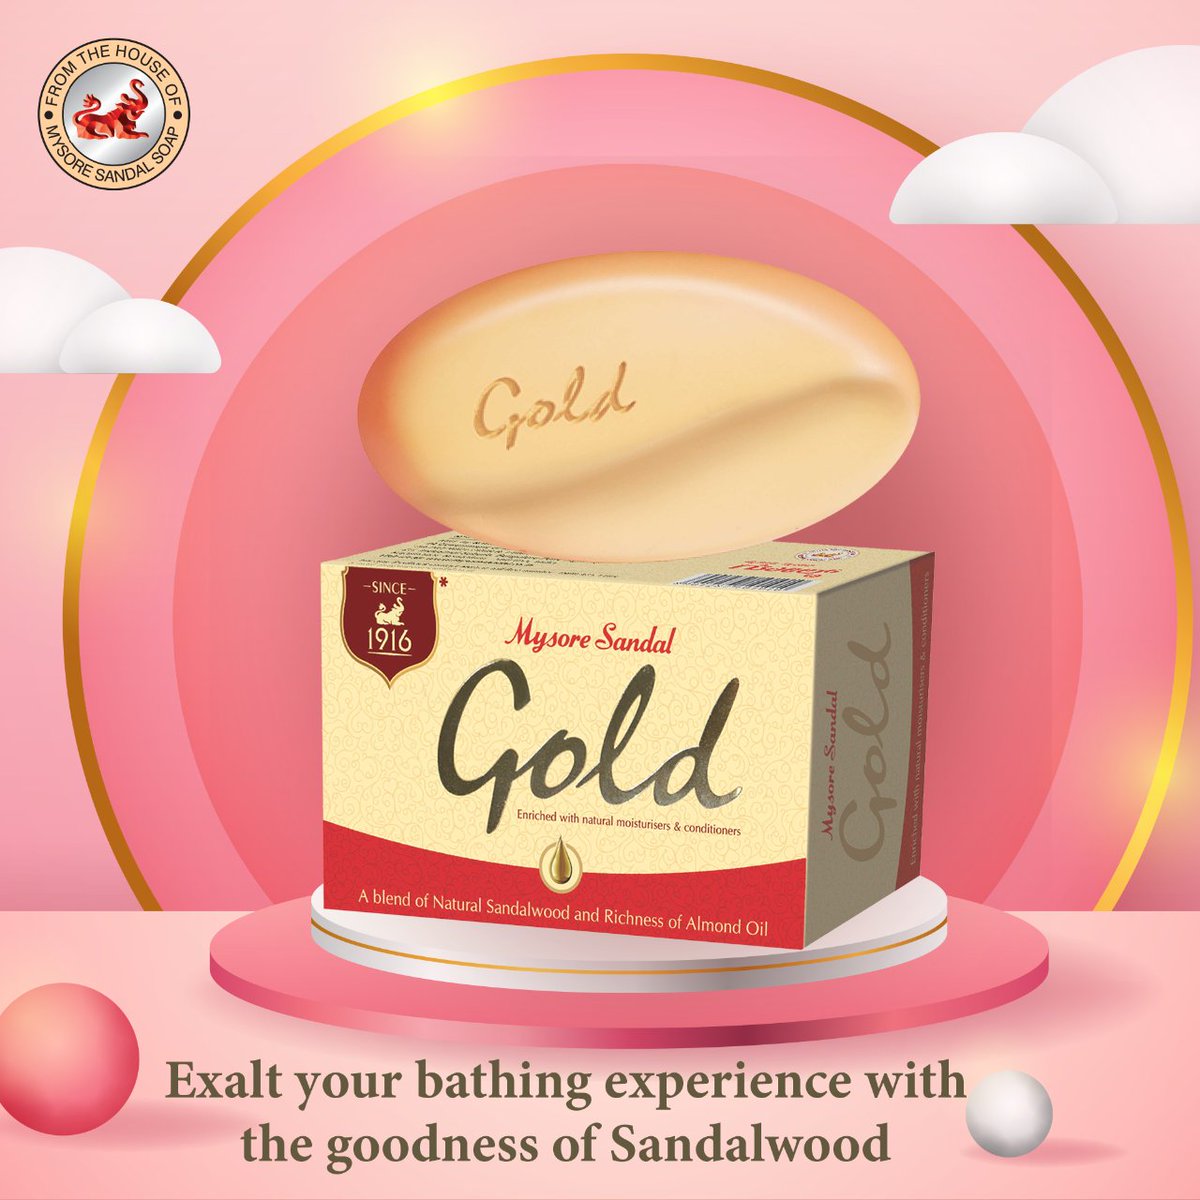 Elevate your bath time with Mysore Sandal Gold Soap ✨ Infused with pure sandalwood, it's a luxurious treat for your skin! ✨

#MysoreSandal #LuxuryBathing #SandalwoodGoodness #MysoreSandalGoldSoap #MysoreSandal #Sandalwood #PureSandal #SandalwoodProducts #MysoreSandalProducts